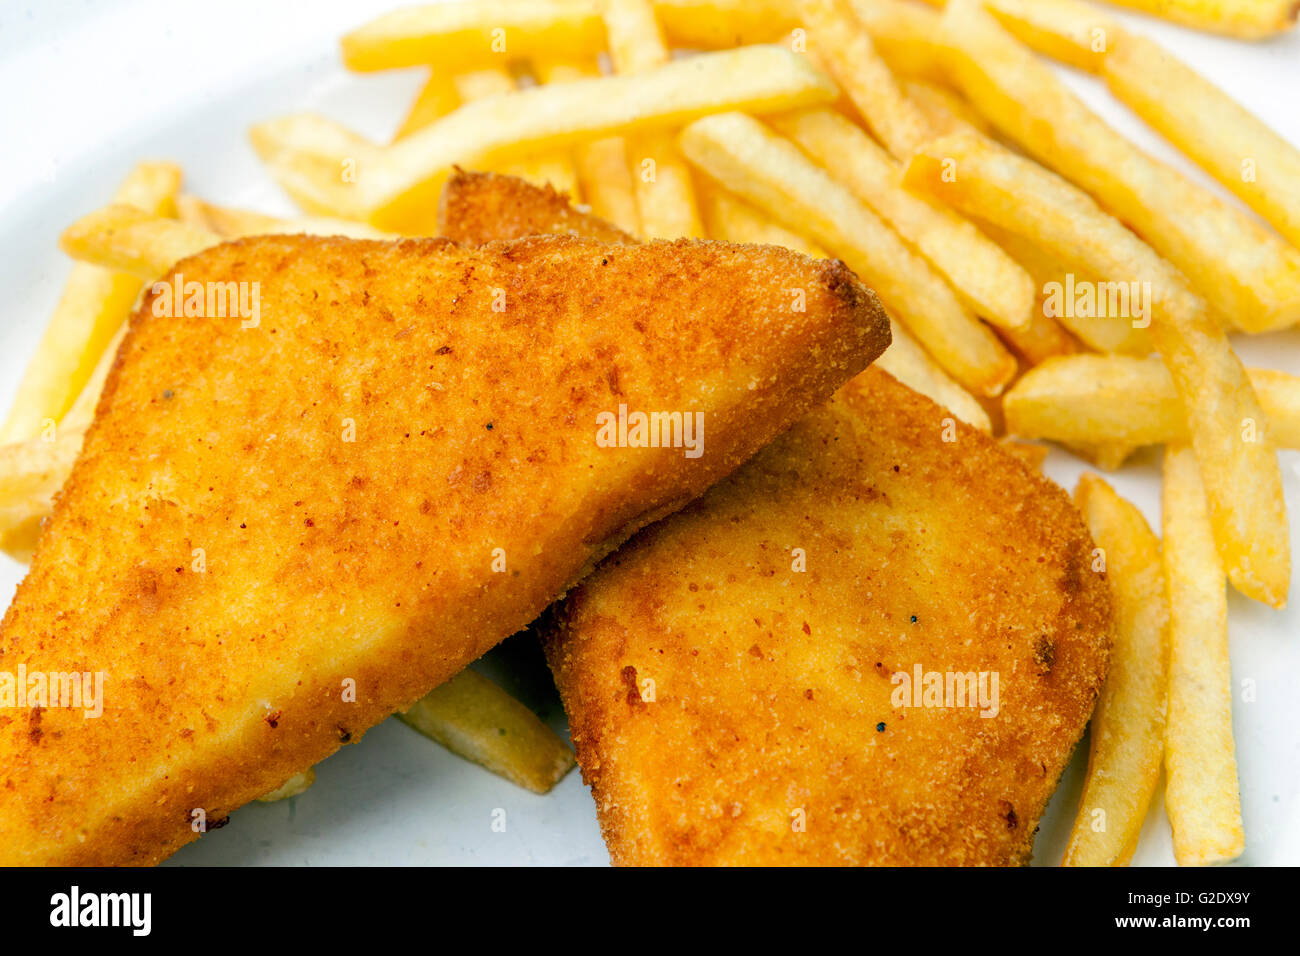 Czech food, Fried cheese with French fries Stock Photo